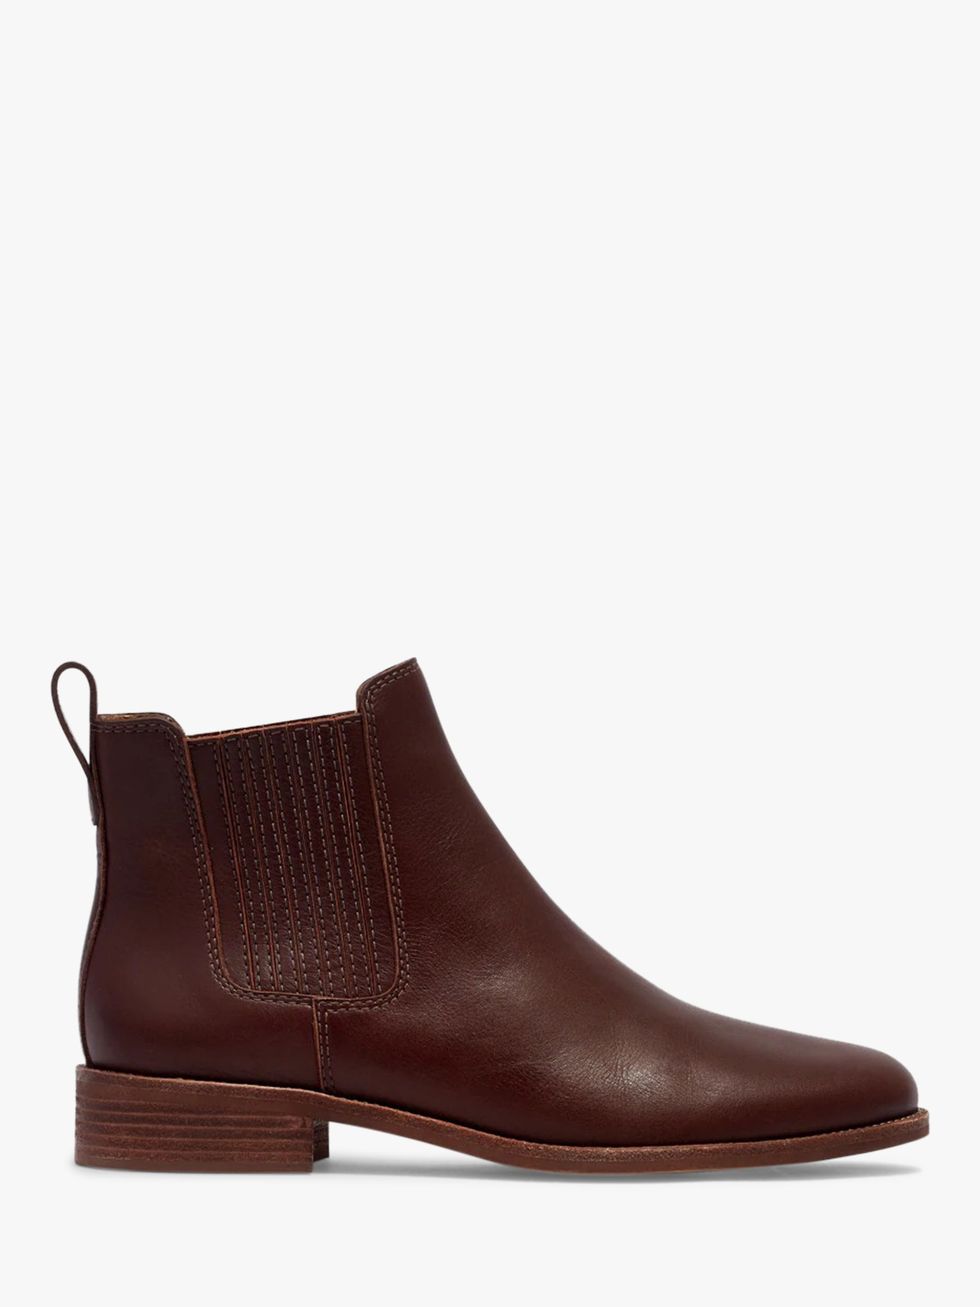 Ainsley Chelsea Ankle Boots, Dark Chestnut Leather